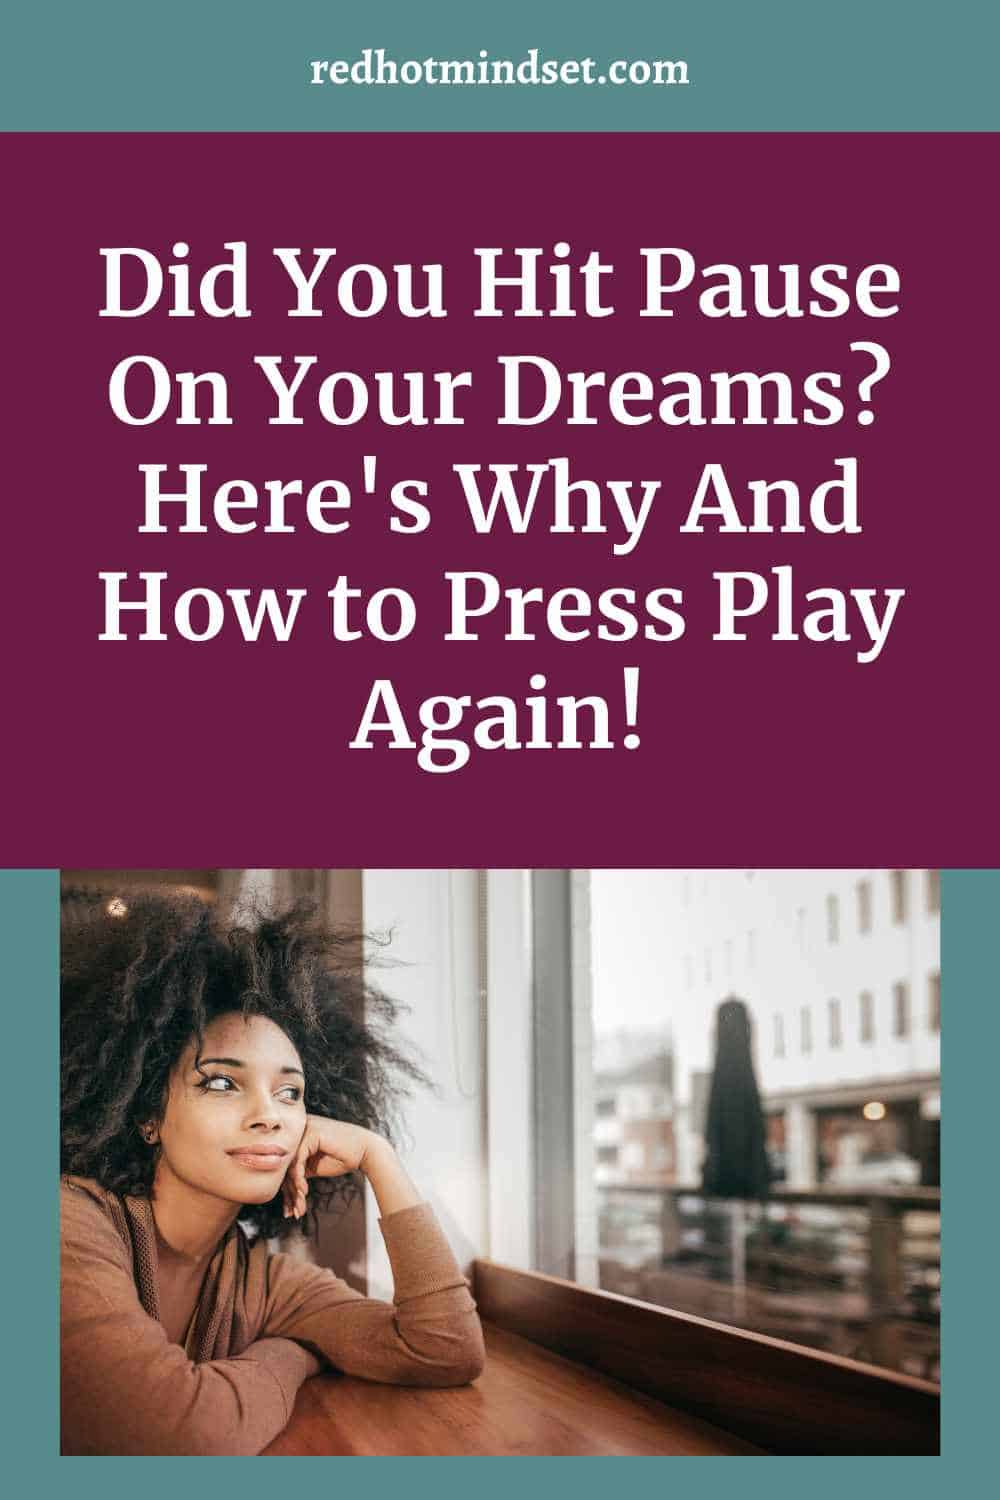 Ep 188 | Did You Hit Pause On Your Dreams? Here’s Why And How to Press Play Again! – my interview on Live by Design with Kate House